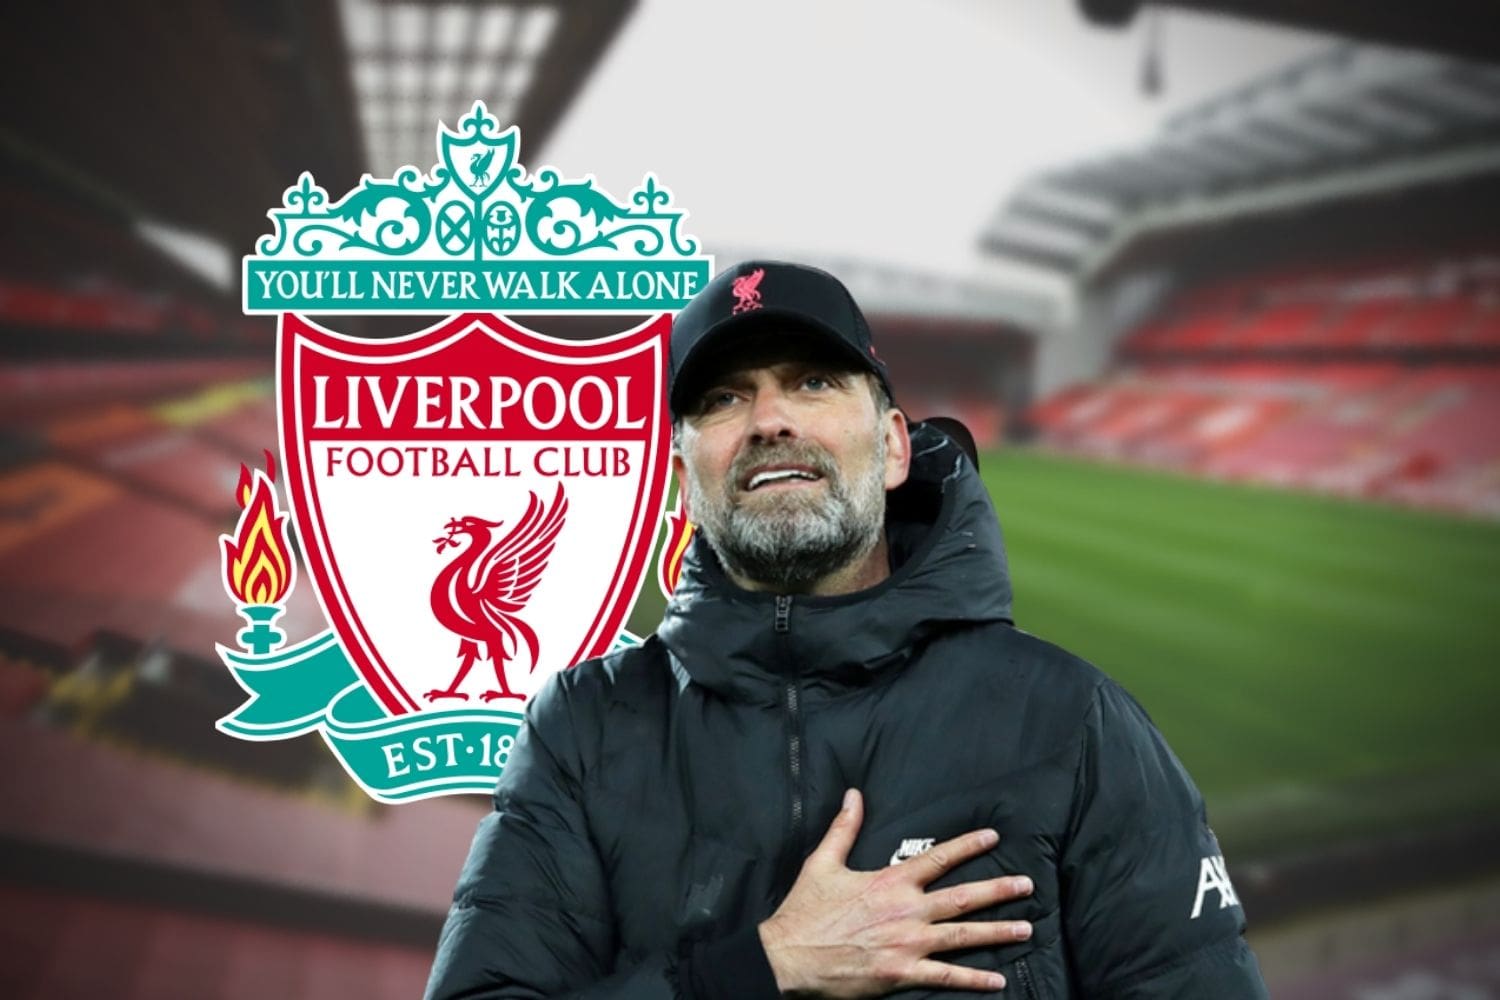 Jurgen Klopp confirms his extended stay at Anfield